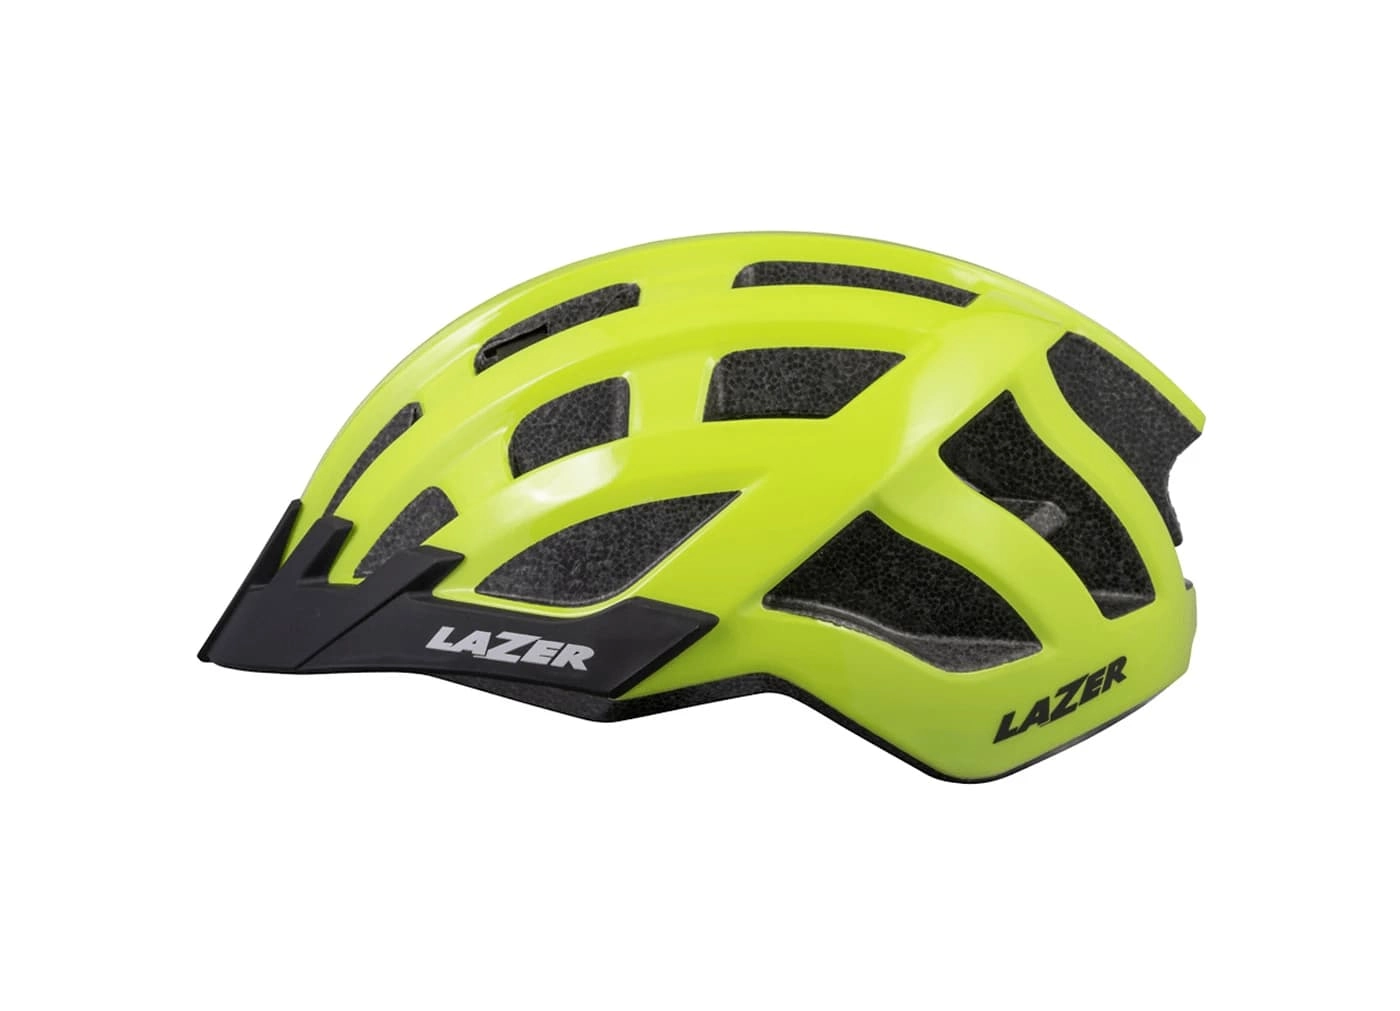 Lazer Compact DLX helmet with LED yellow